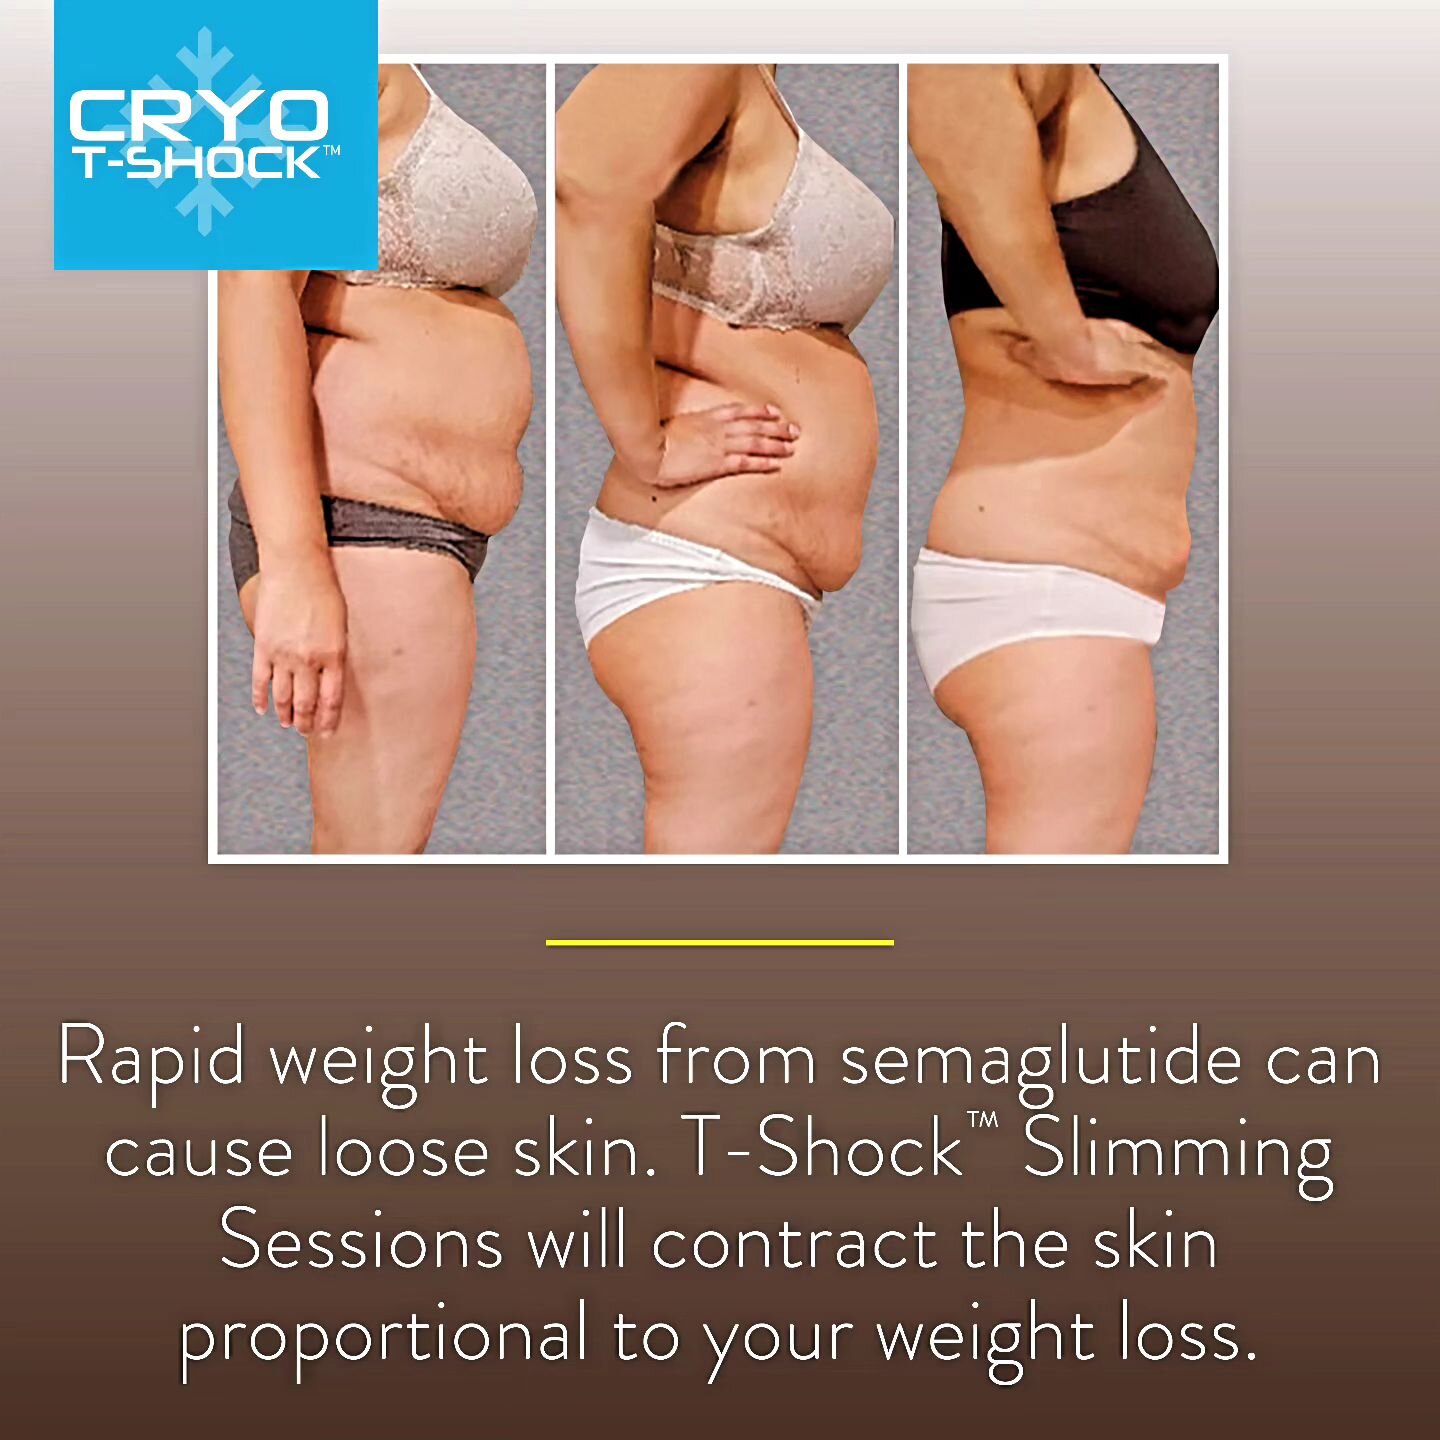 Are you in the process of losing weight? Worried about loose skin ? No need to worry the CRYO T  SHOCK  can help contract the loose skin portportional to your weight loss so no need for surgery once you have the weight off !

#weightlossjourney #loos